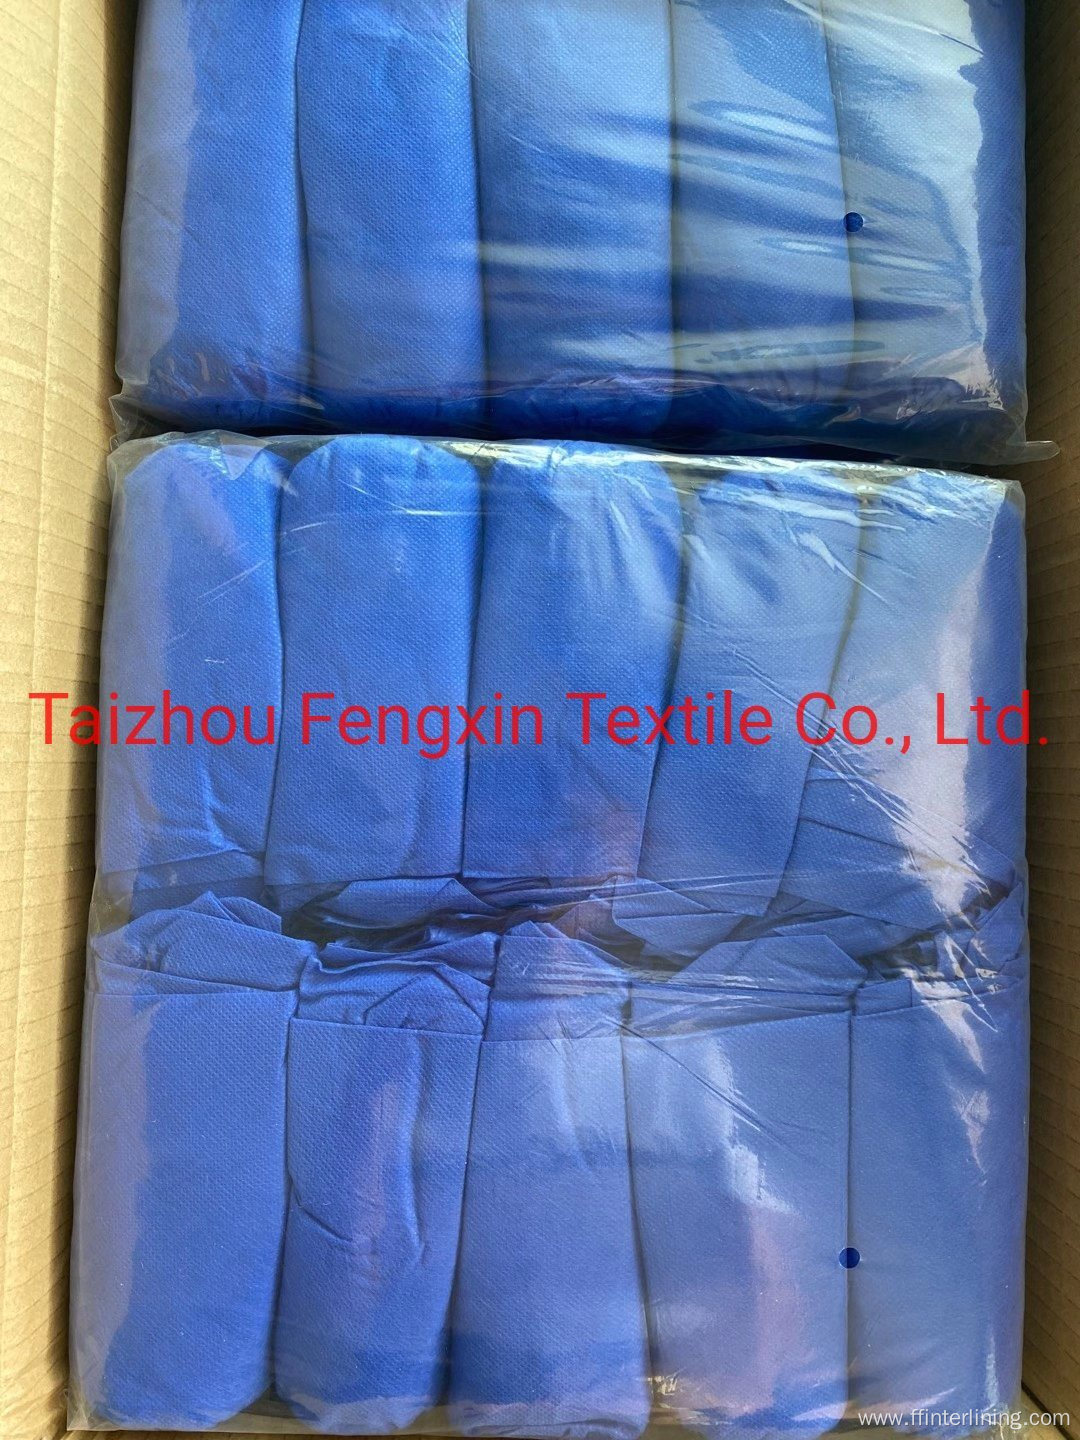 SMS nonwoven fabric for medical usage